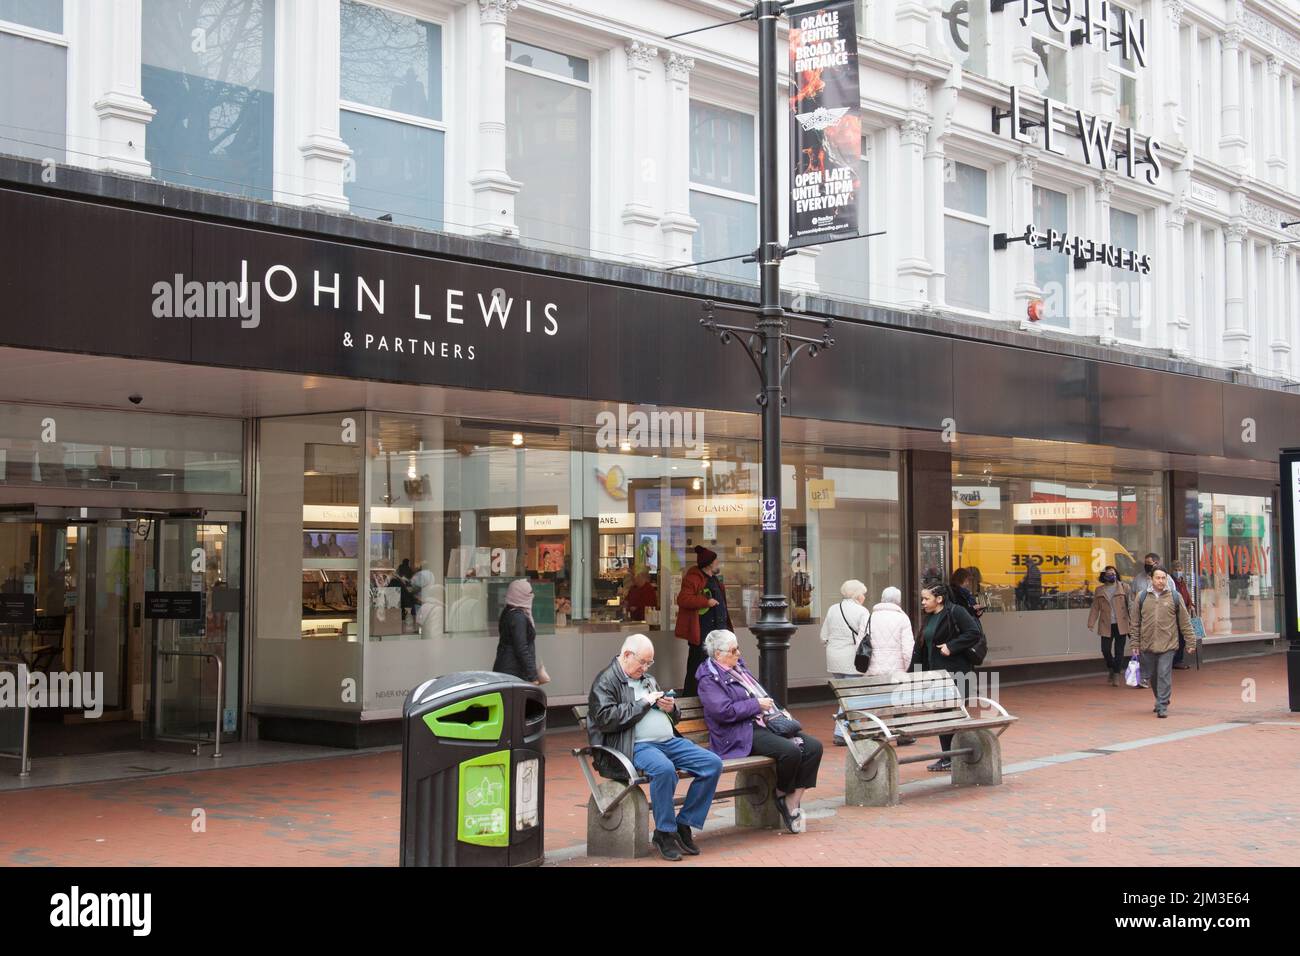 The John Lewis department store in Reading, Berks in the UK Stock Photo